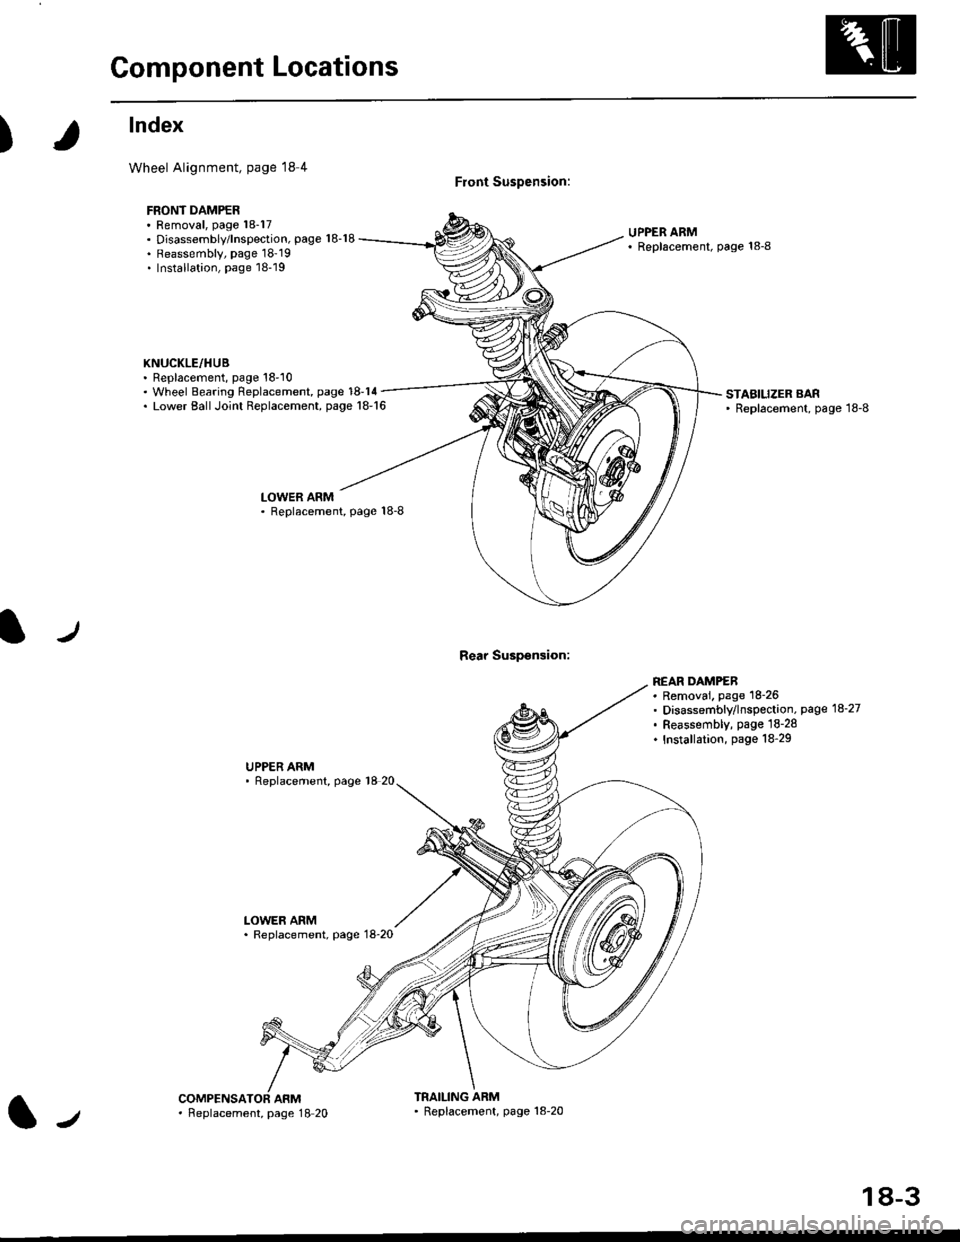 HONDA CIVIC 2000 6.G Workshop Manual Component Locations
)
lndex
Wheel Alignment, page l8 4
FBONT DAMPER. Removal, page 18-17. Disassembly/lnspection, page 18-18. Reassembly, page 1819. Installation, page 18-19
KNUCKLE/HUB. Replacement,